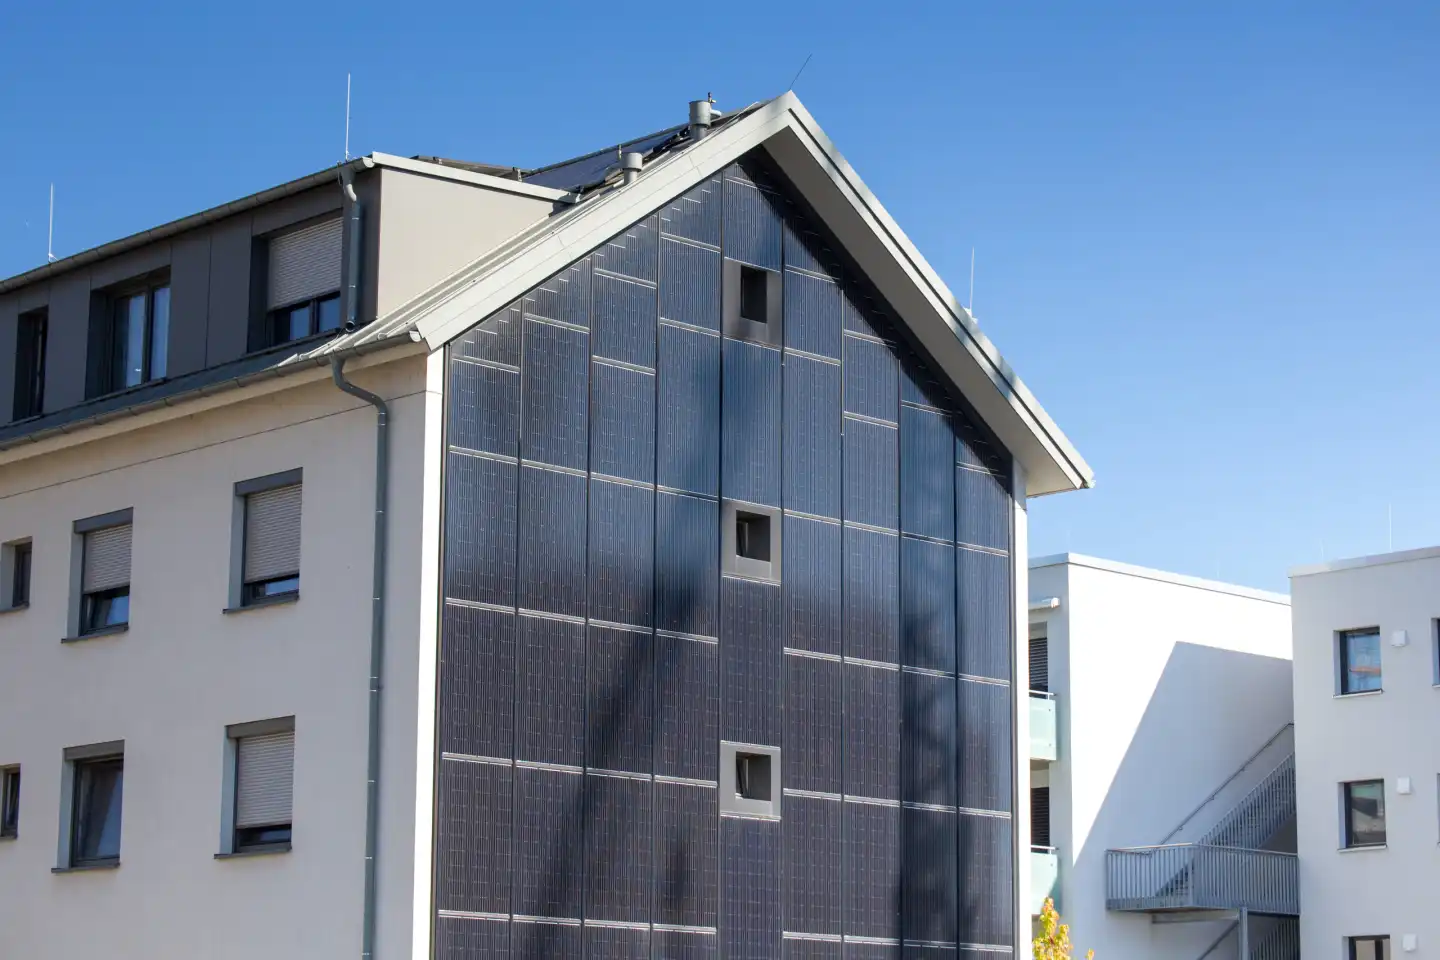 Apartment building with solar façade in FRANKLIN, a former US residential quarter in Mannheim, Germany